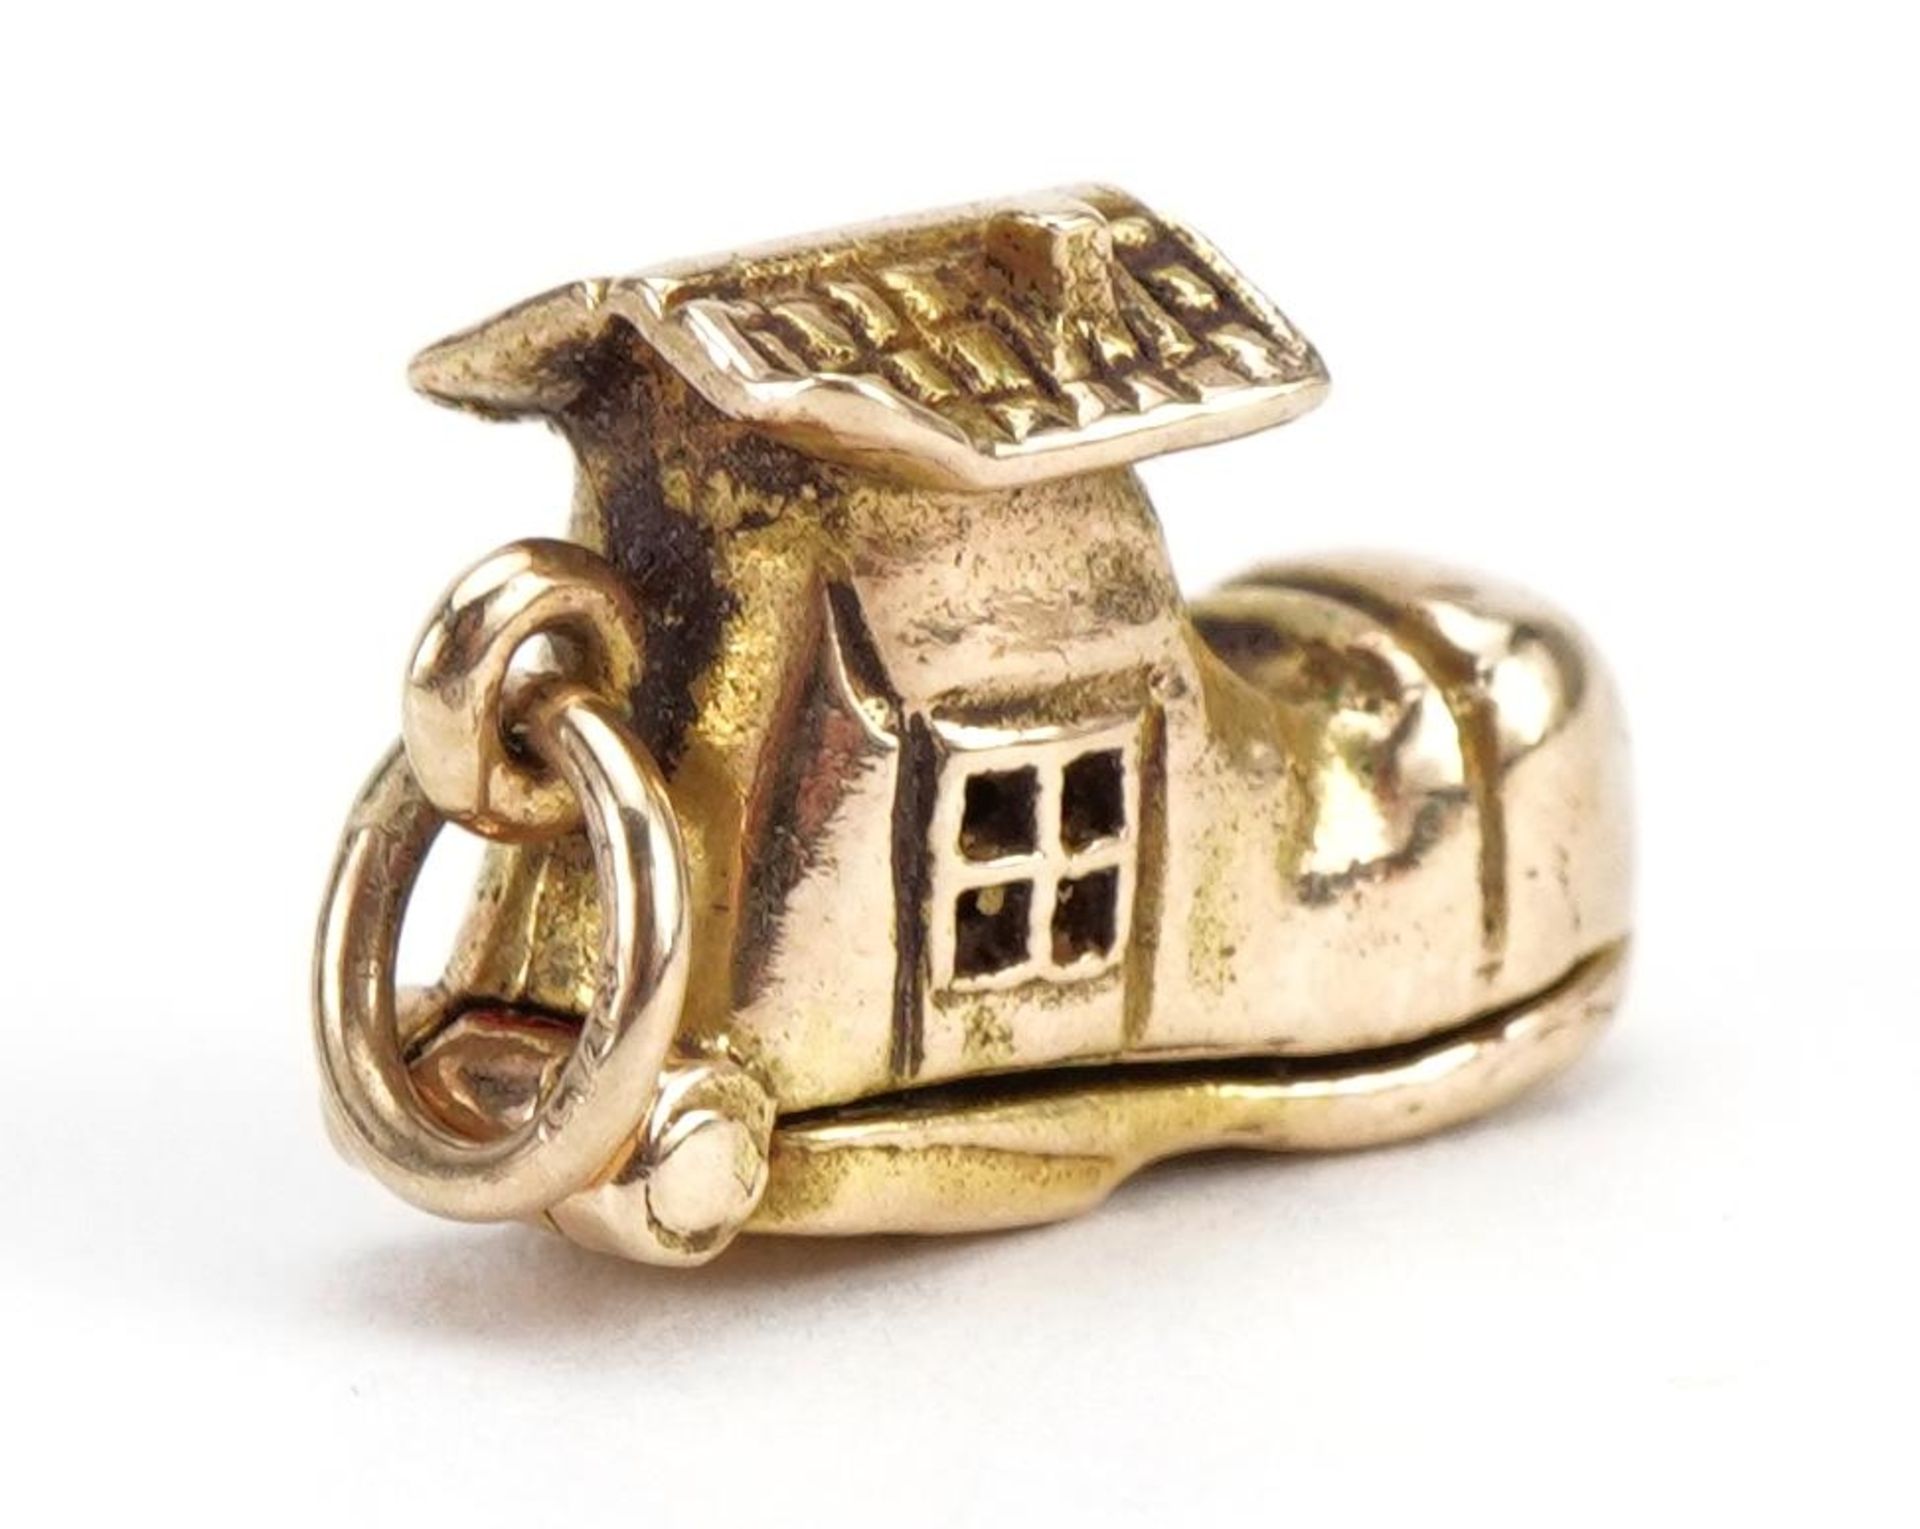 9ct gold shoe charm opening to reveal enamelled figures, 1.5cm wide, 2.7g - Bild 3 aus 3